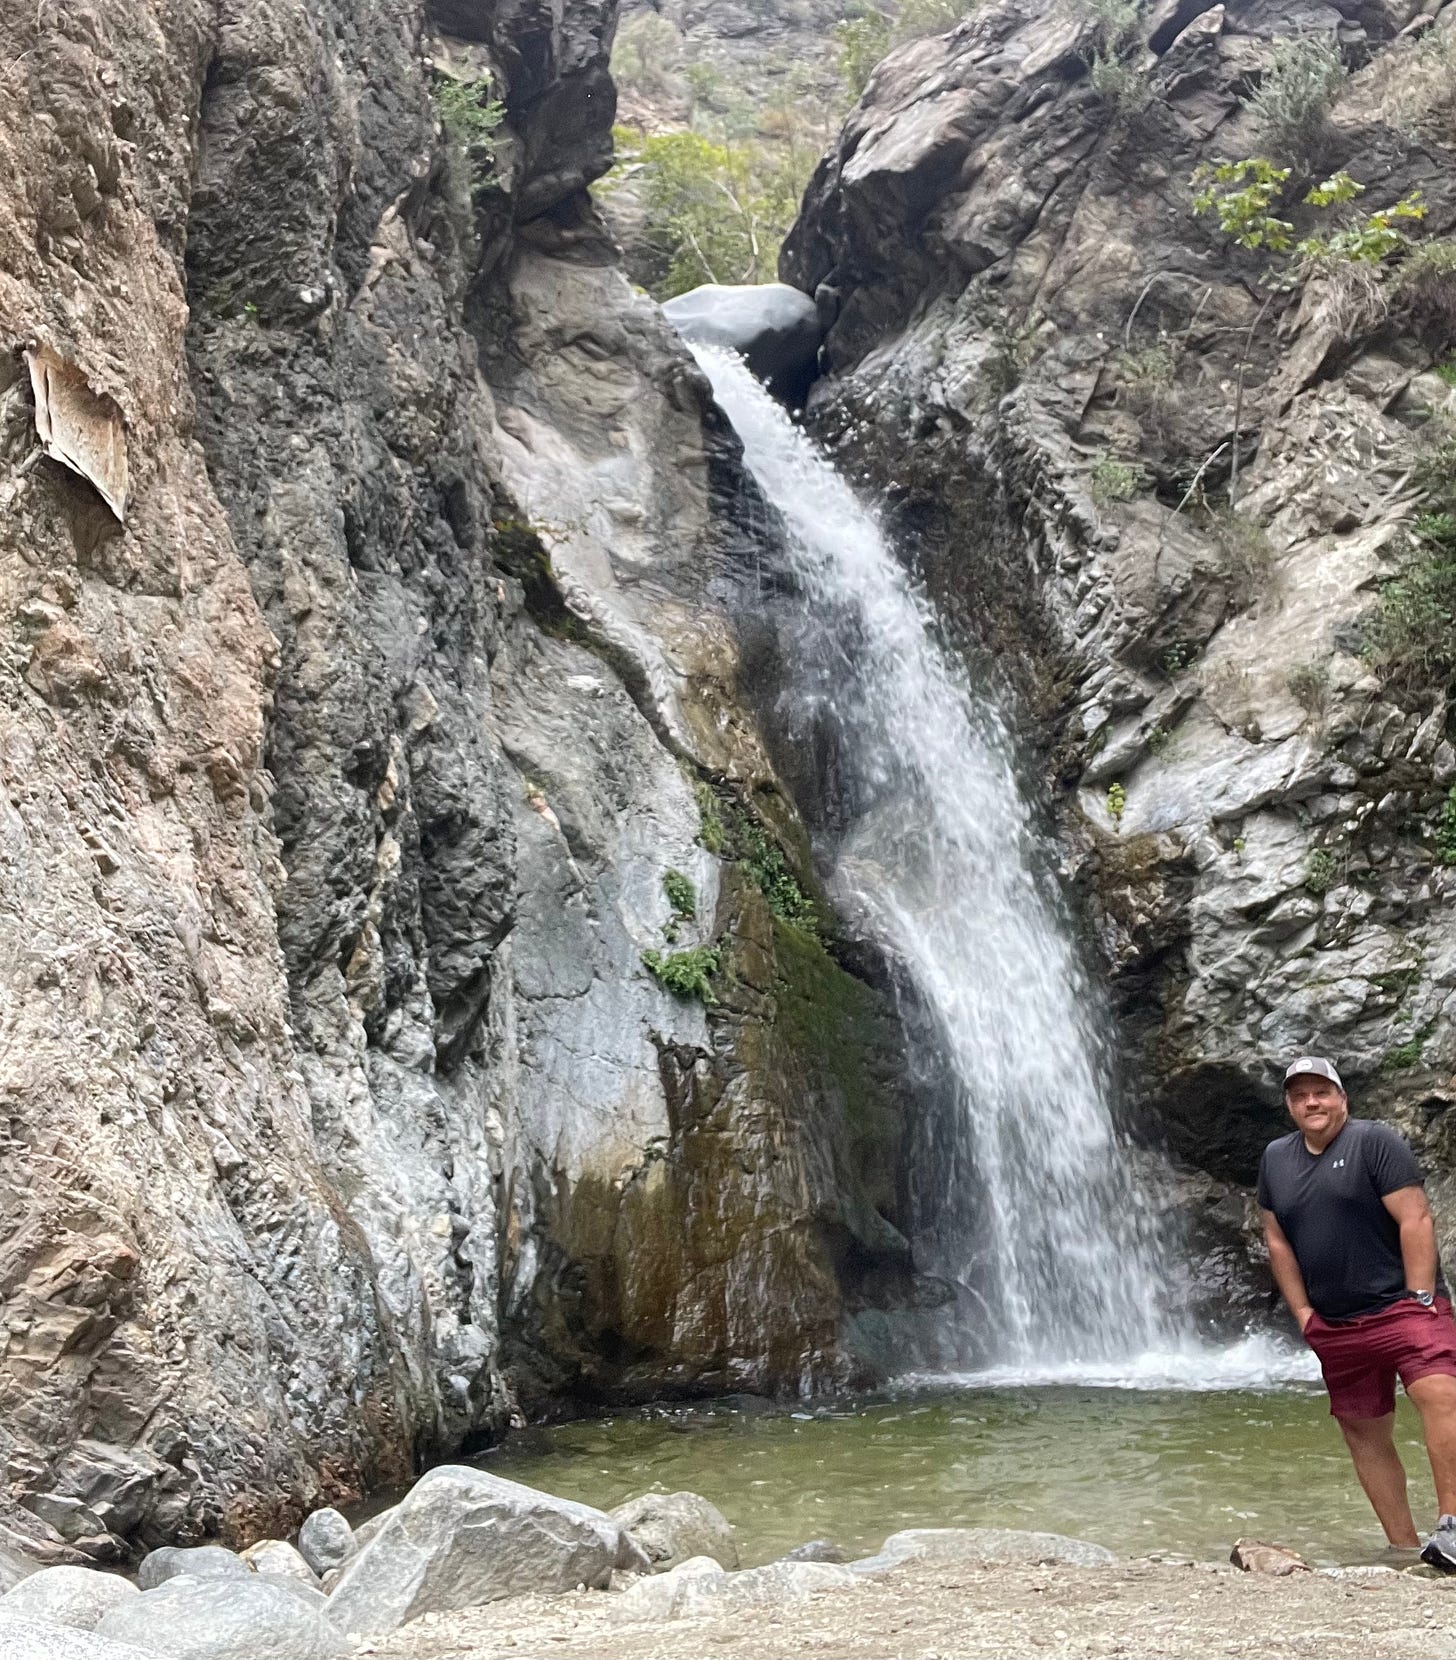 A small waterfall cascading dow into a pool between two rock walls, mickey is to the right, wearing maroon shorts and a black t-shirt